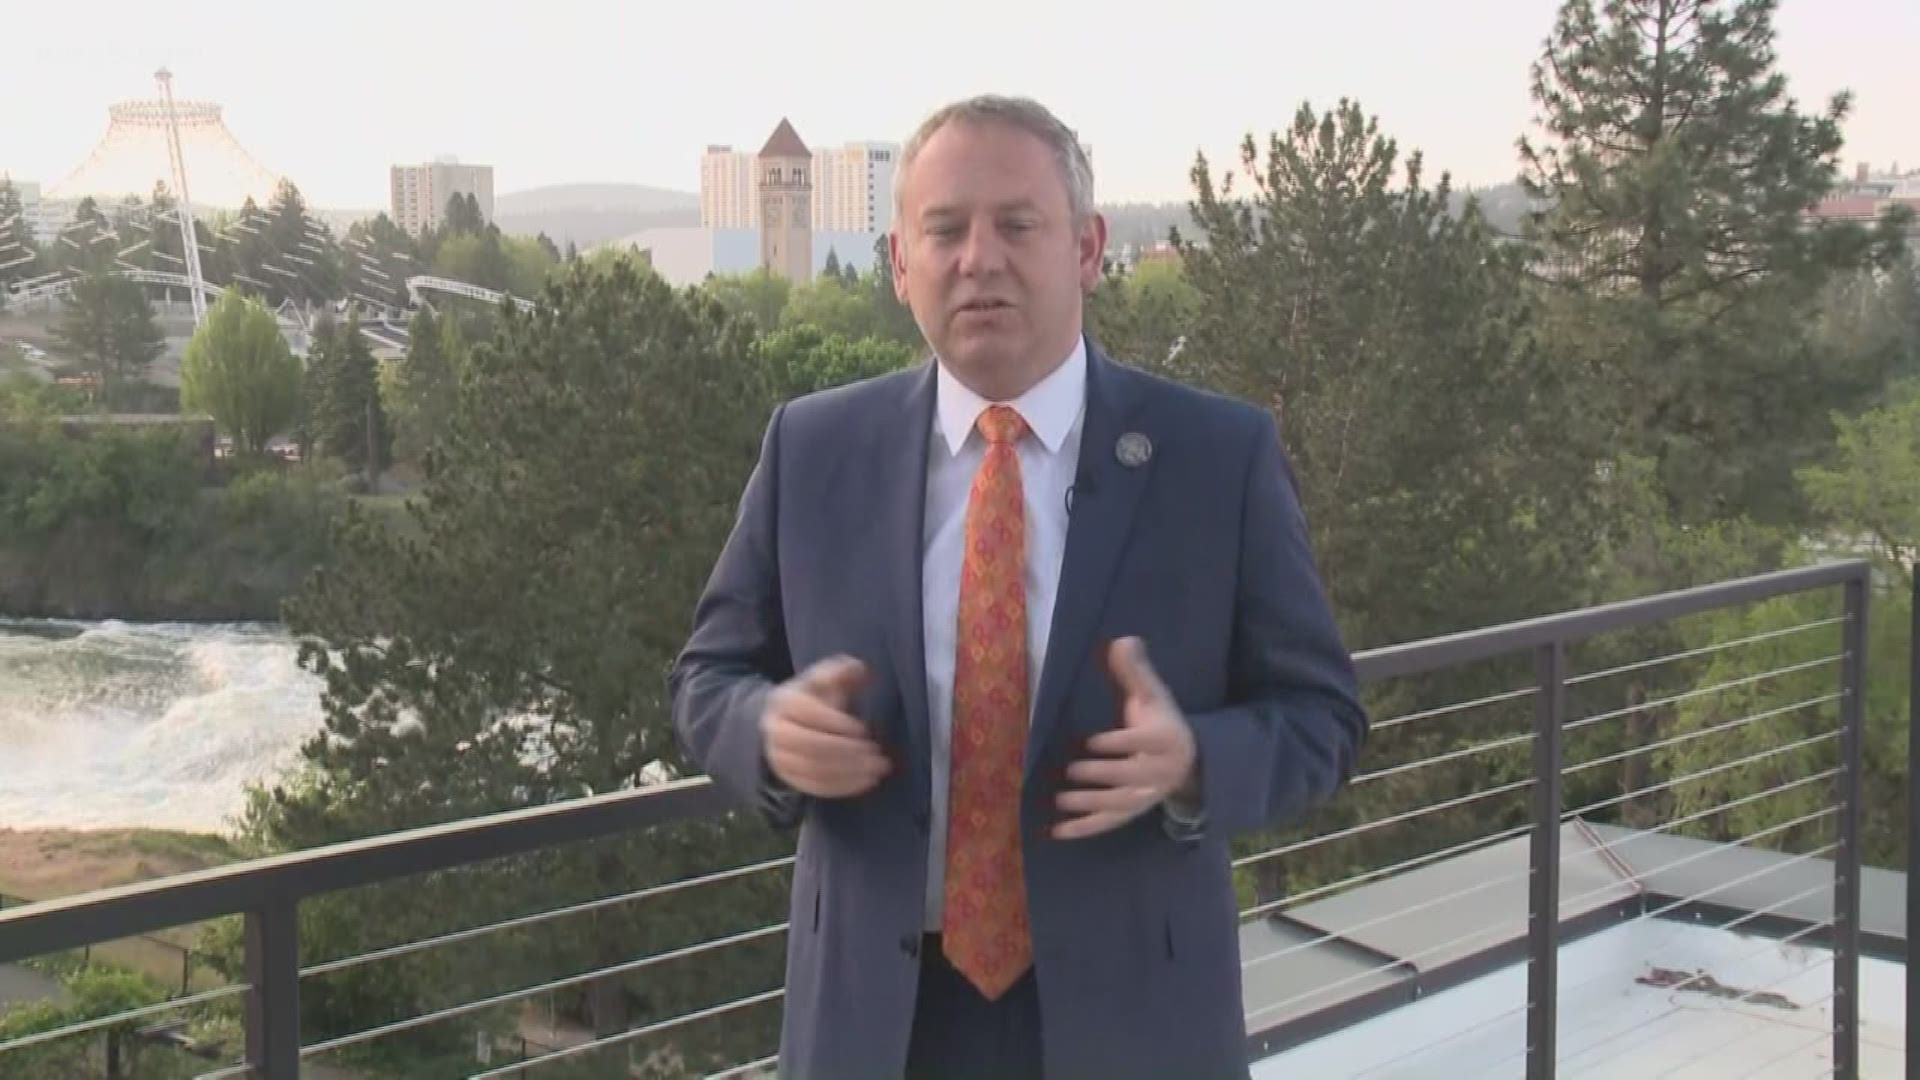 Spokane Mayor David Condon is not mincing words in his effort to convince Seattleites to move east.